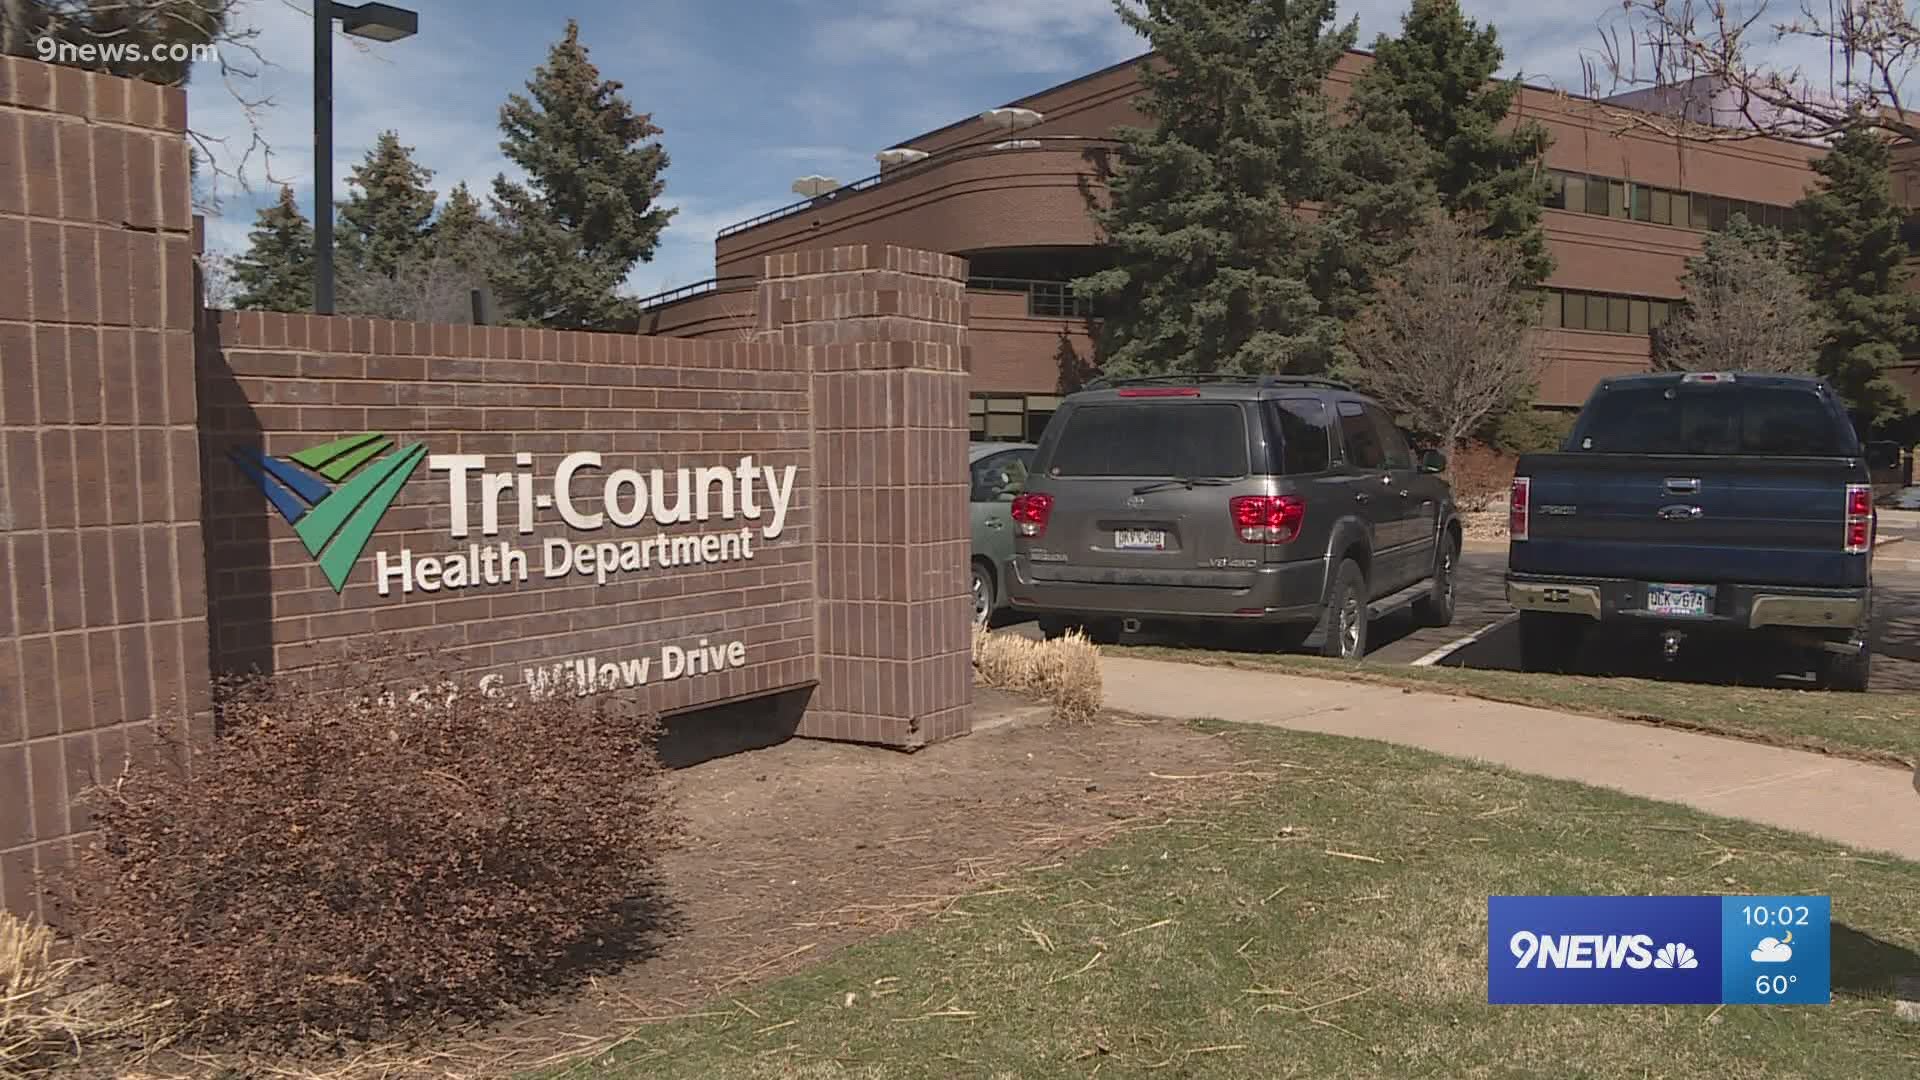 A threat was sent to the Tri-County Health Department and more.